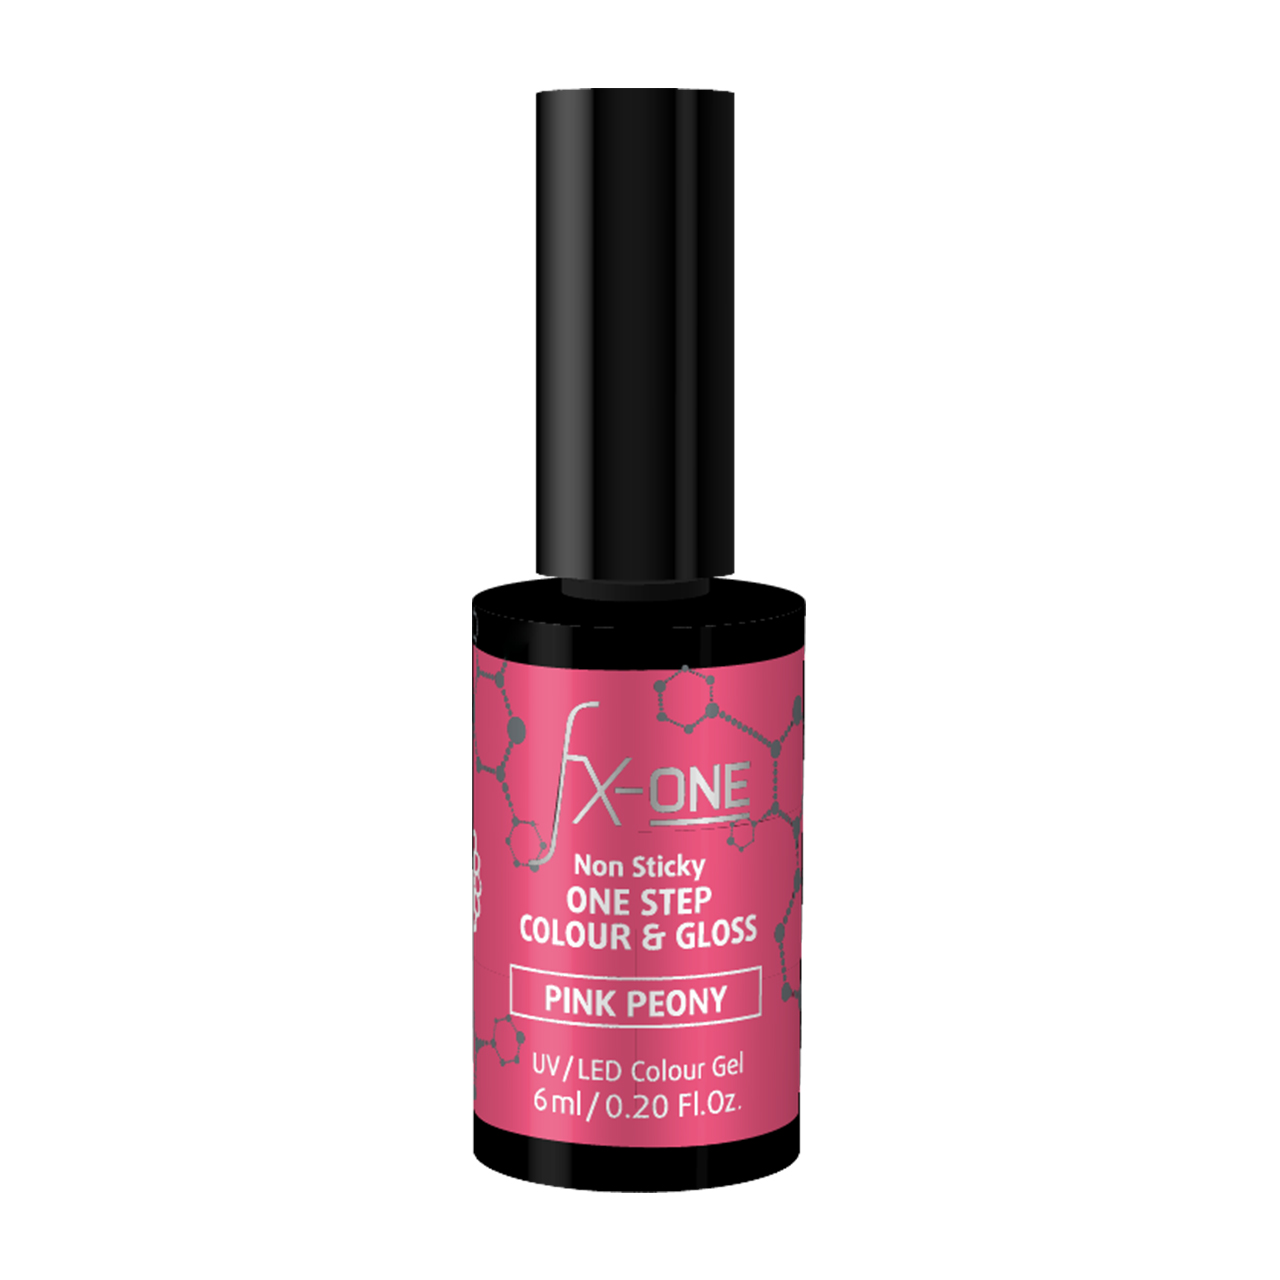 FX-One Colour & Gloss Pink Peony